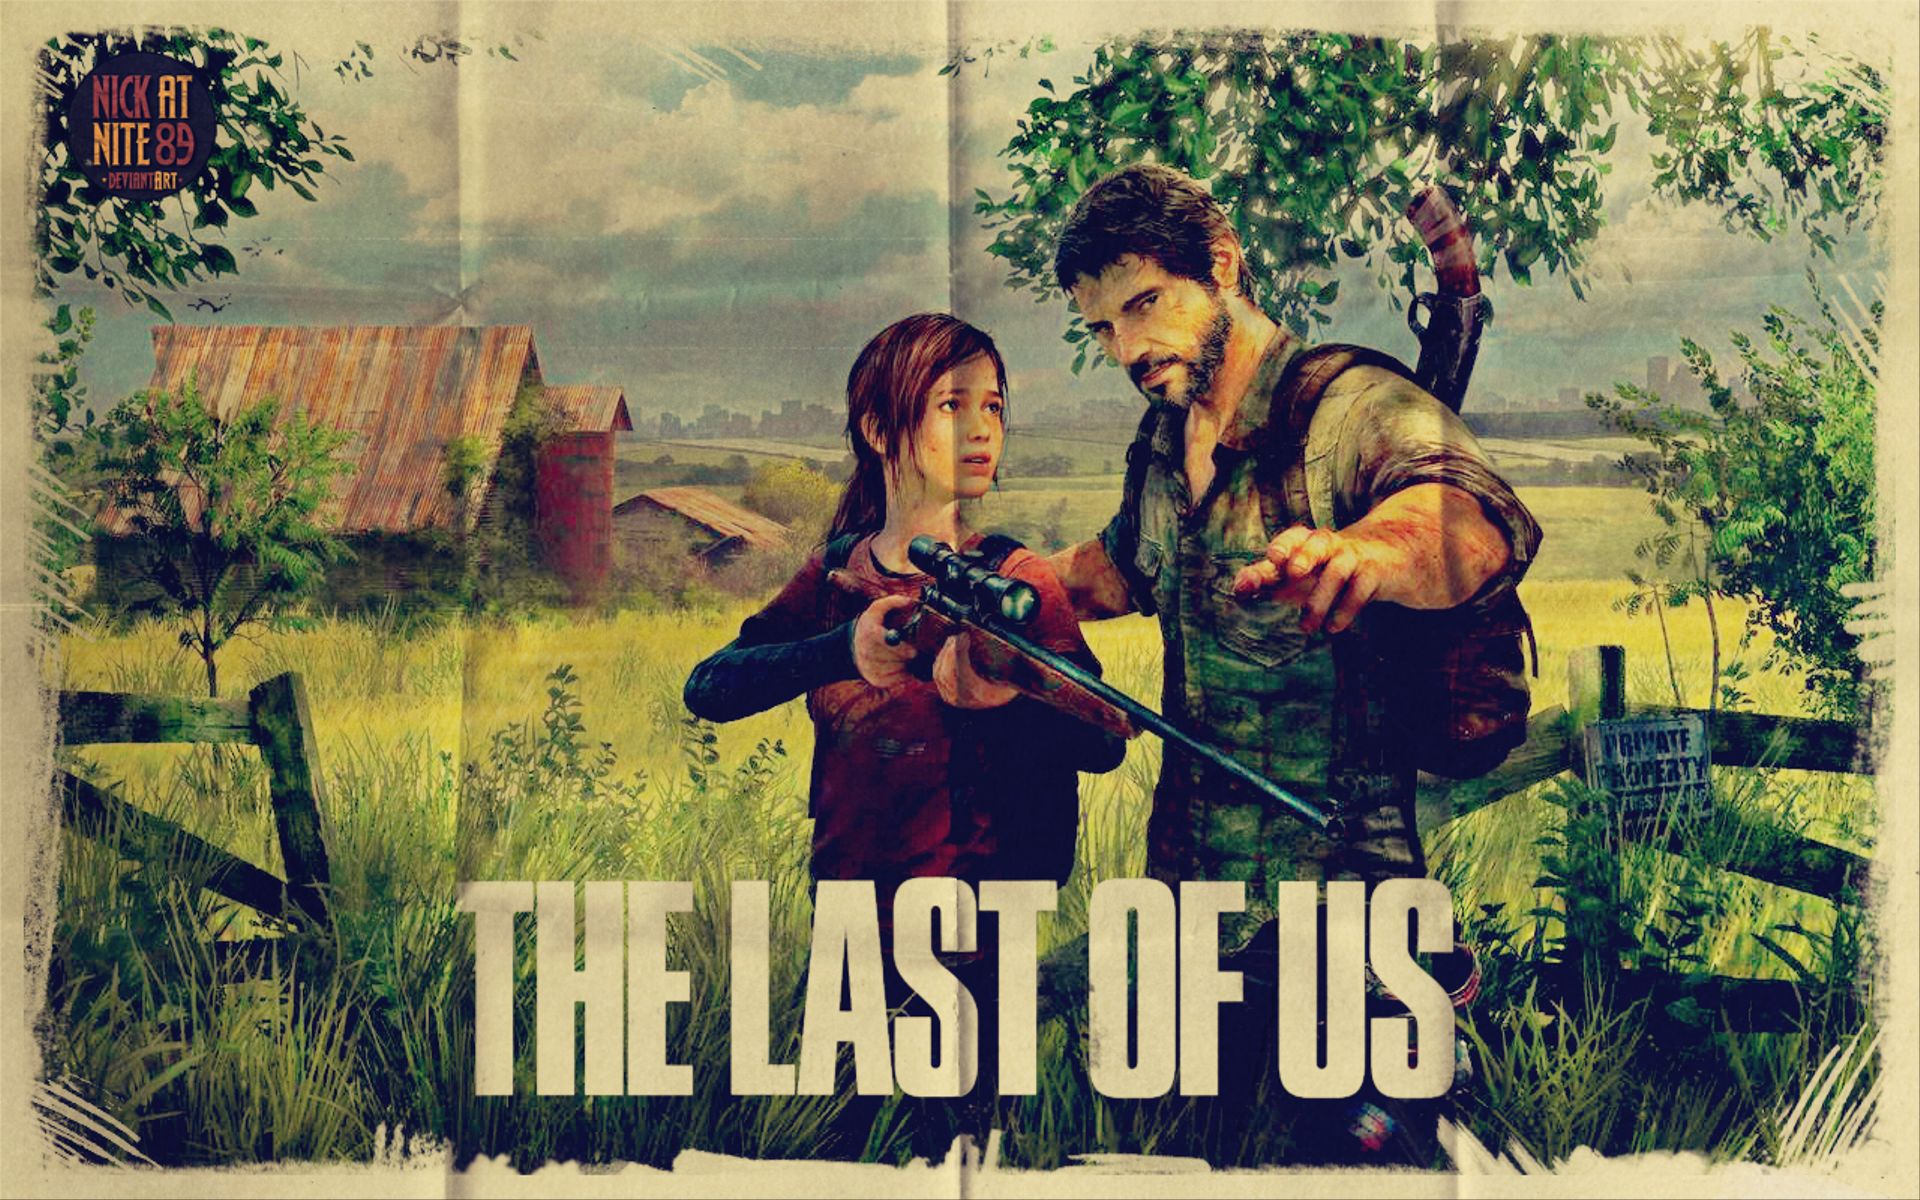 HD desktop wallpaper: Video Game, The Last Of Us, Ellie (The Last Of Us),  Joel (The Last Of Us) download free picture #1506998